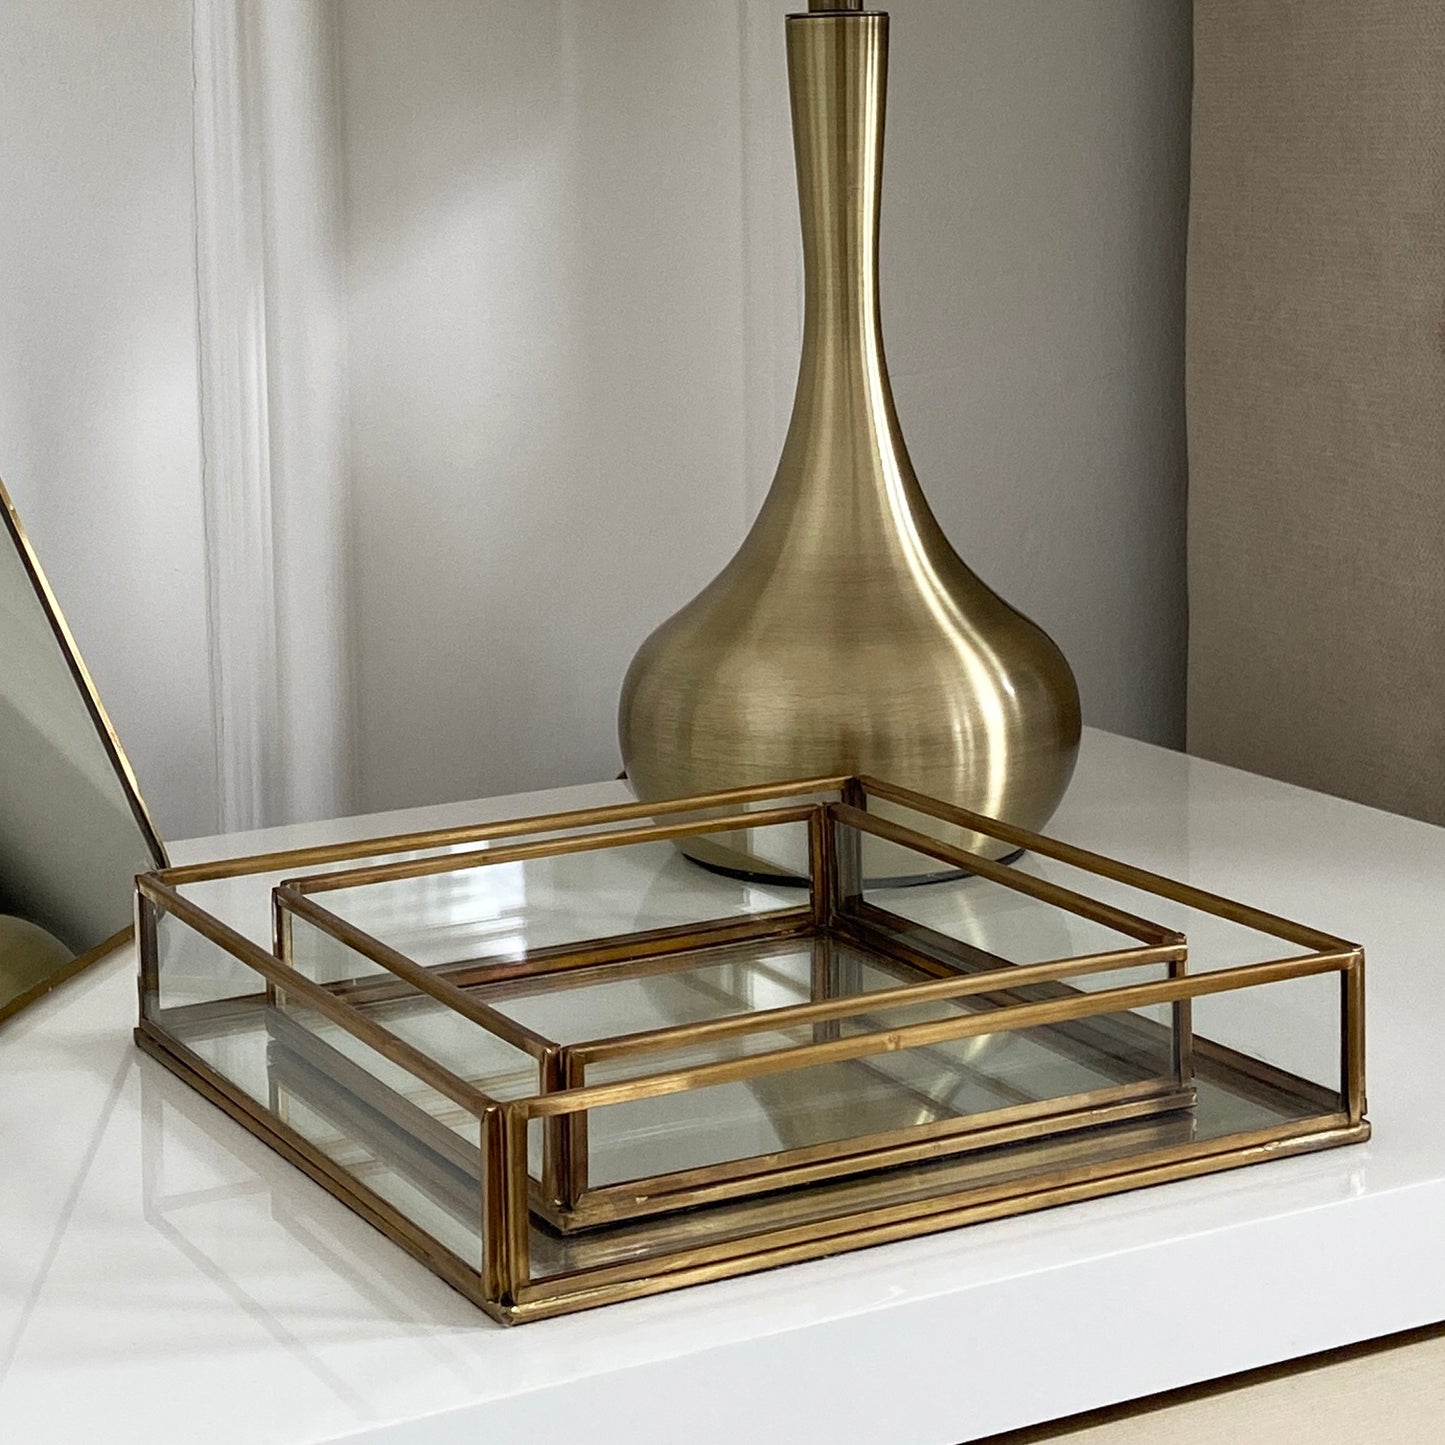 Cove Antique Gold Square Mirrored Tray Set